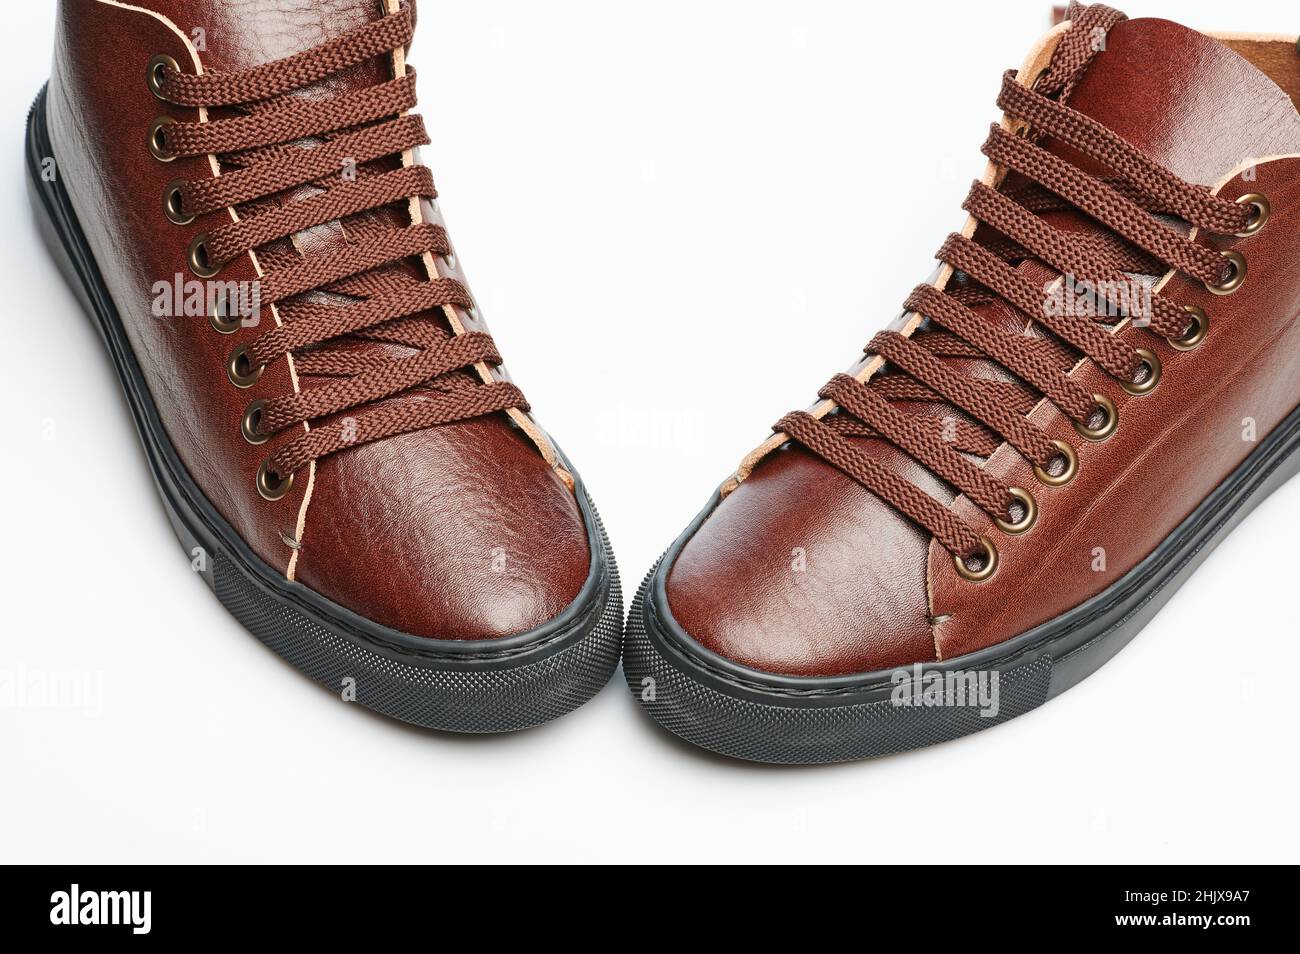 Original brown leather sneakers with laces isolated Stock Photo